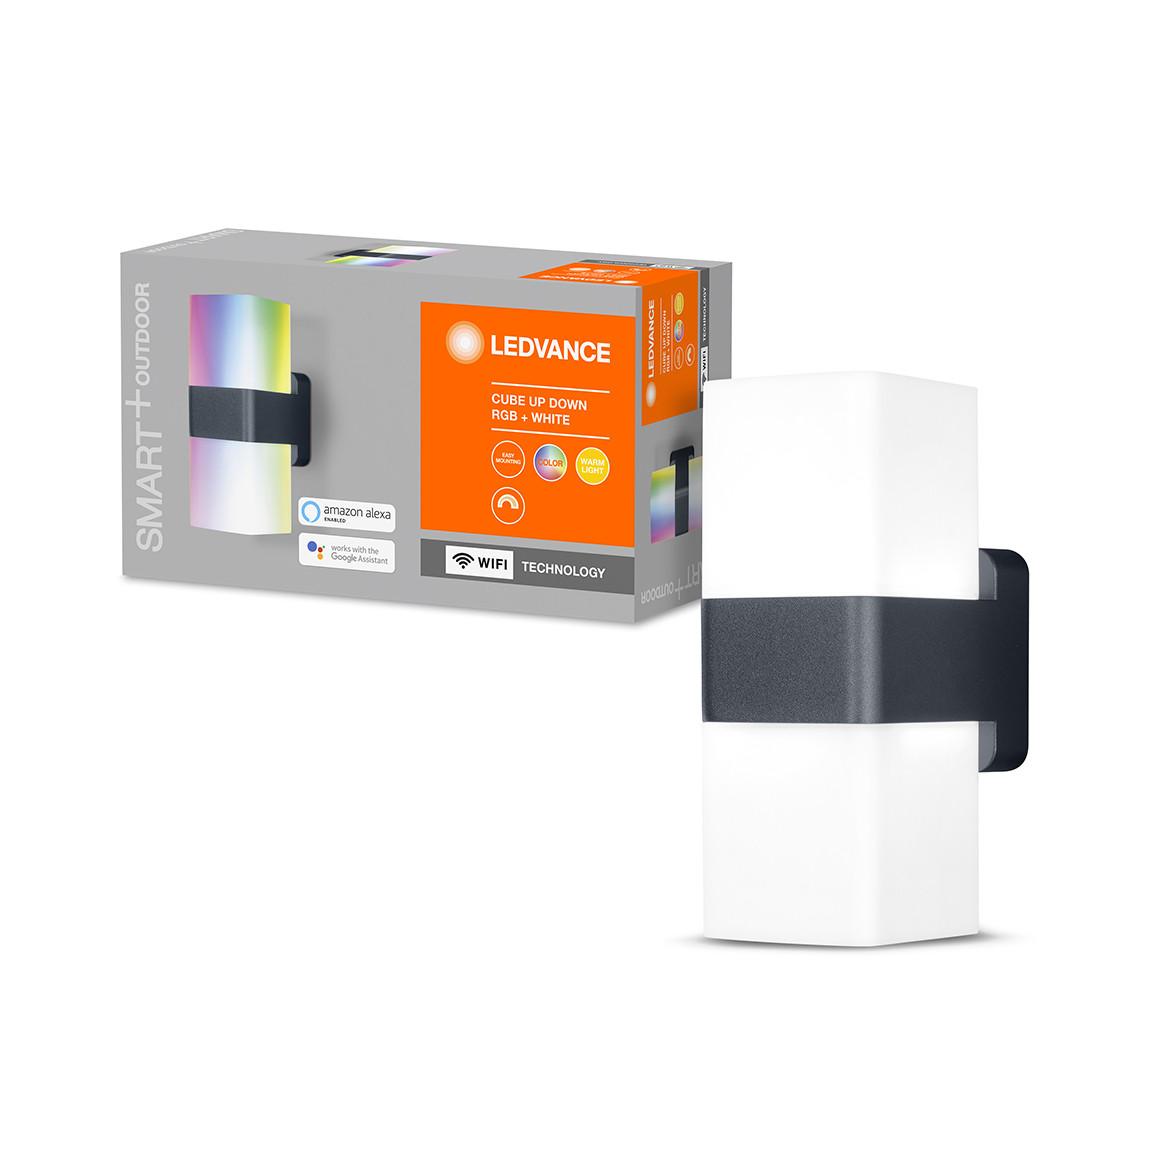 Ledvance SMART+ Wall Cube Updown Wandleuchte RGBW WiFi - Verpackung